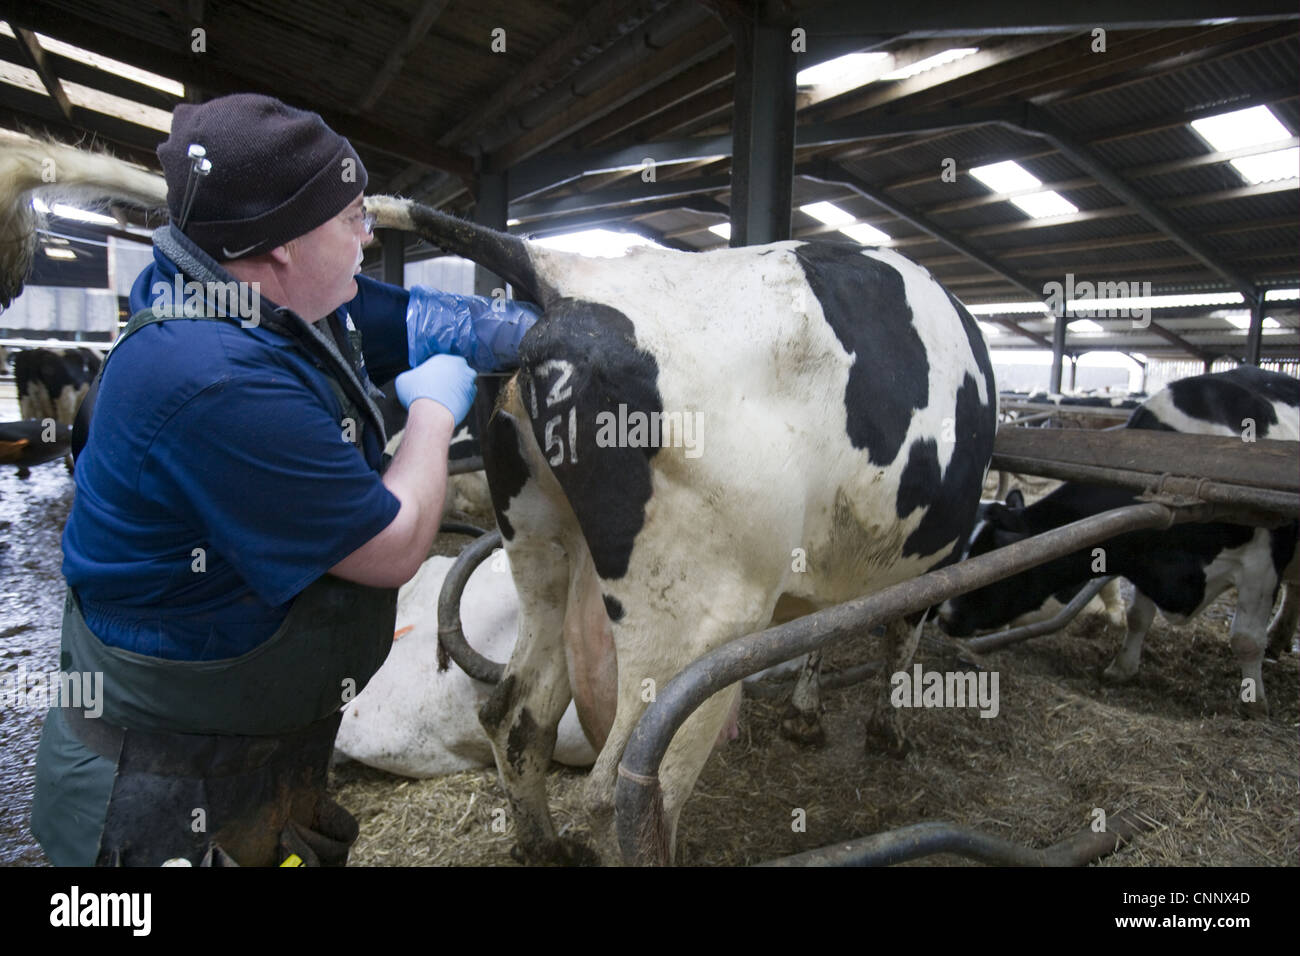 Reproduction management in dairy herd, farmer artificially inseminating cow, England, England, february Stock Photo